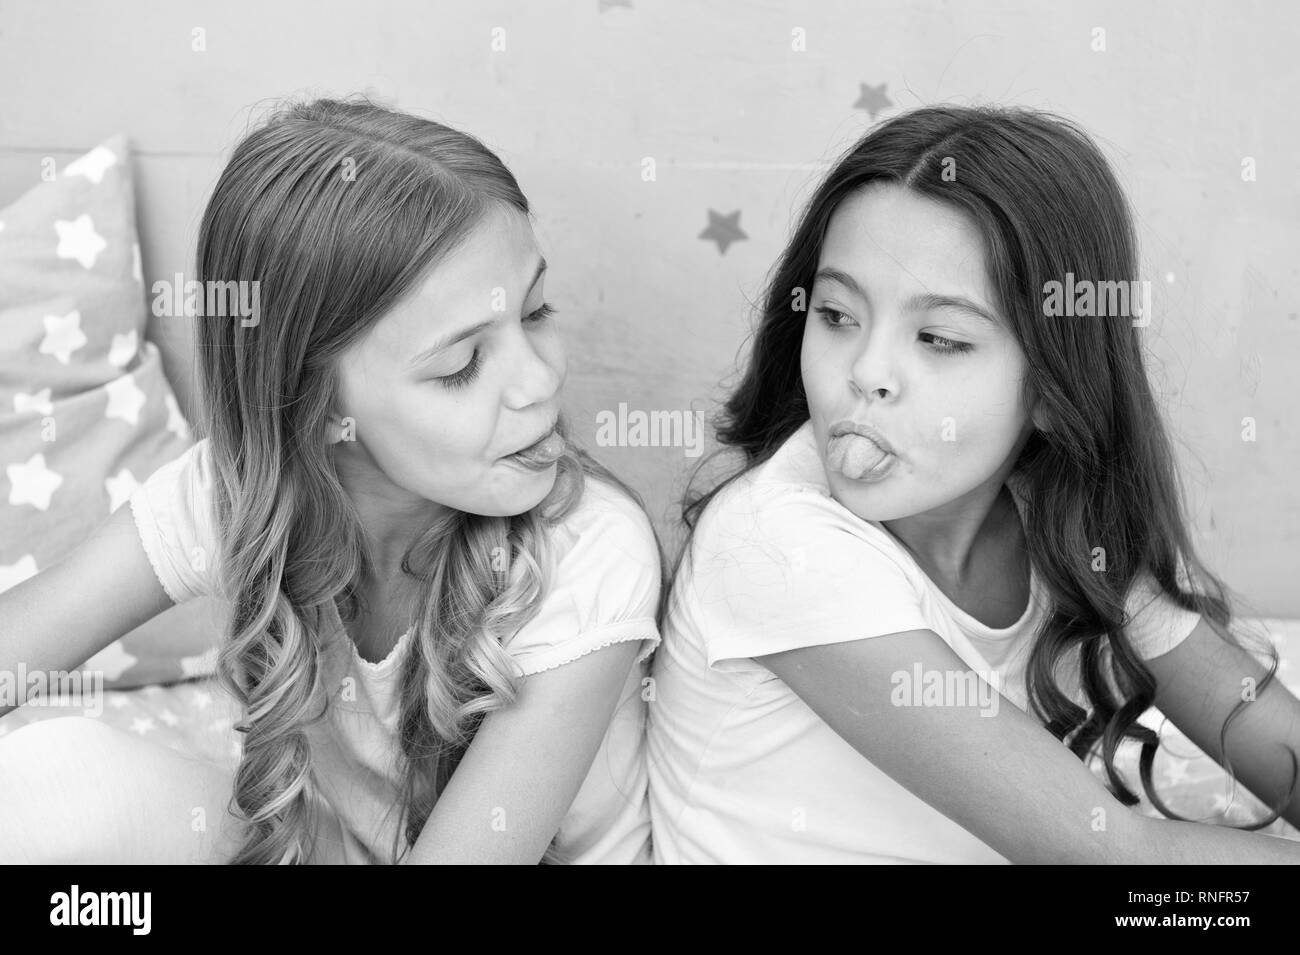 Children show tongue each other. Relations sisters or best friends. Overcome relations issues. Childhood friendship. Friends sit back to back show tongues. Grimace and emotion. Antics showing tongue. Stock Photo